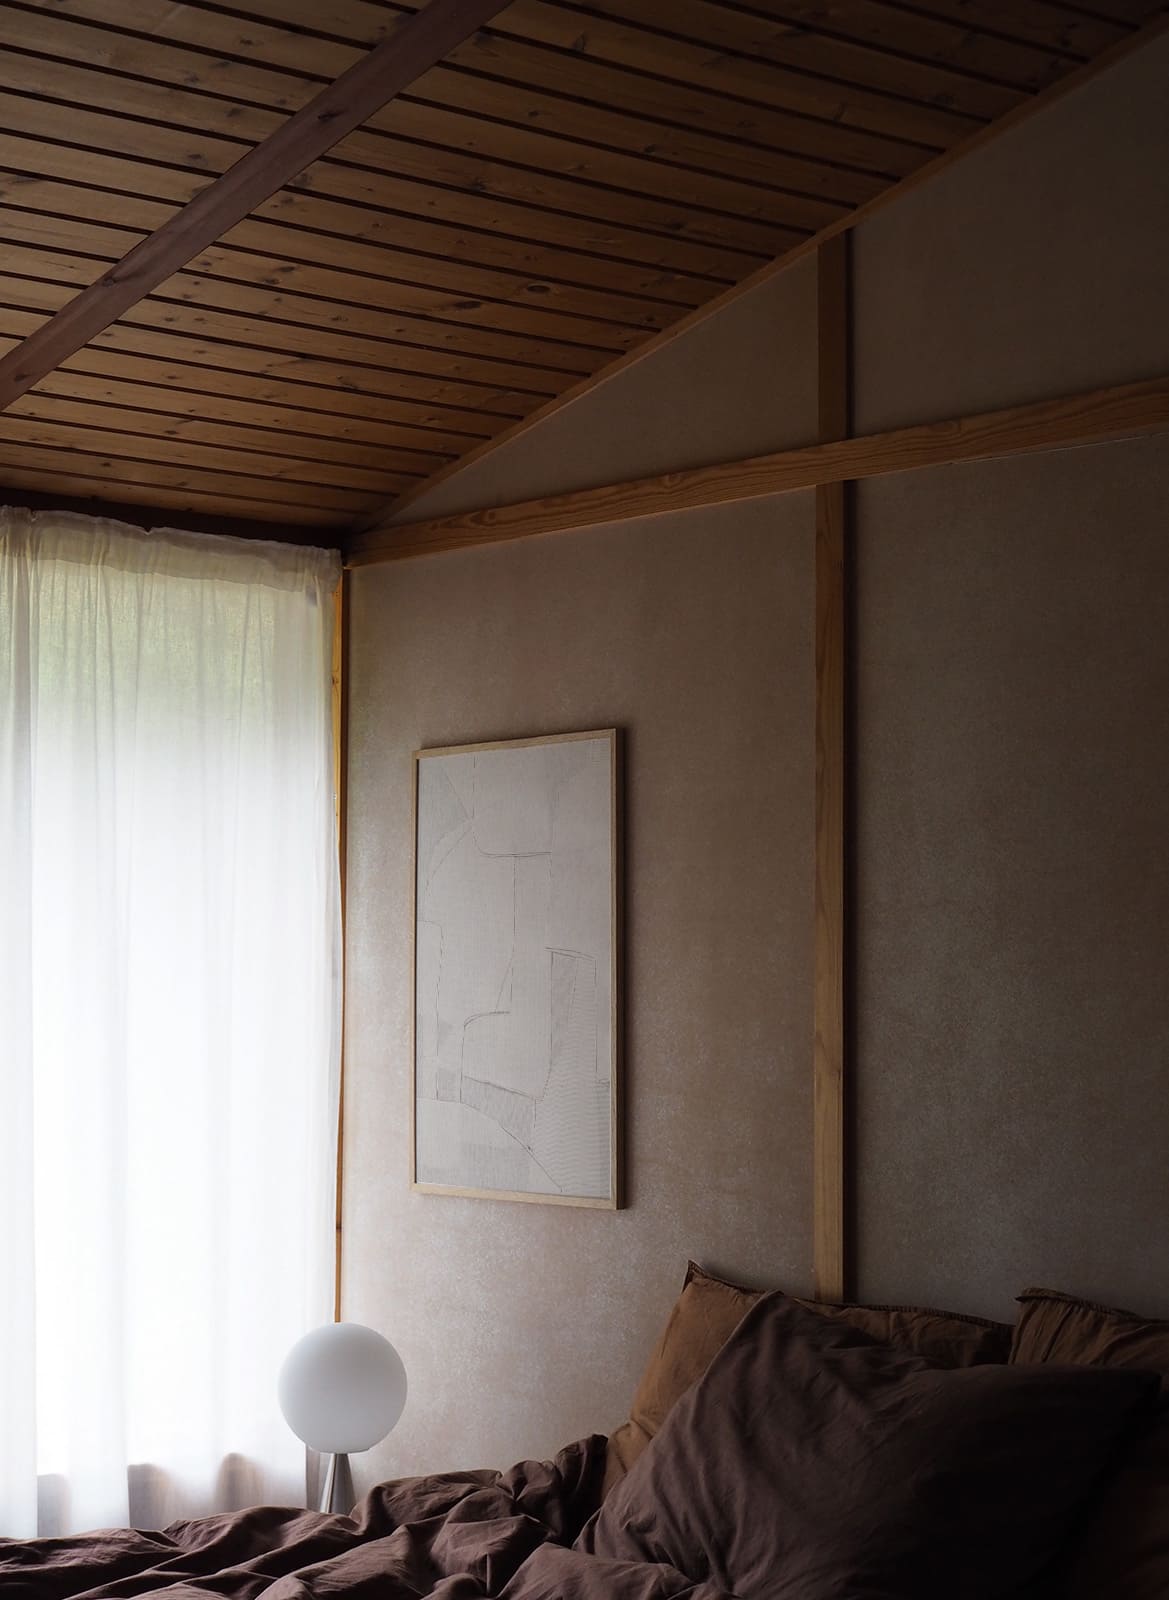 Framed minimalistic poster hanging in a bed room by Atelier Cph